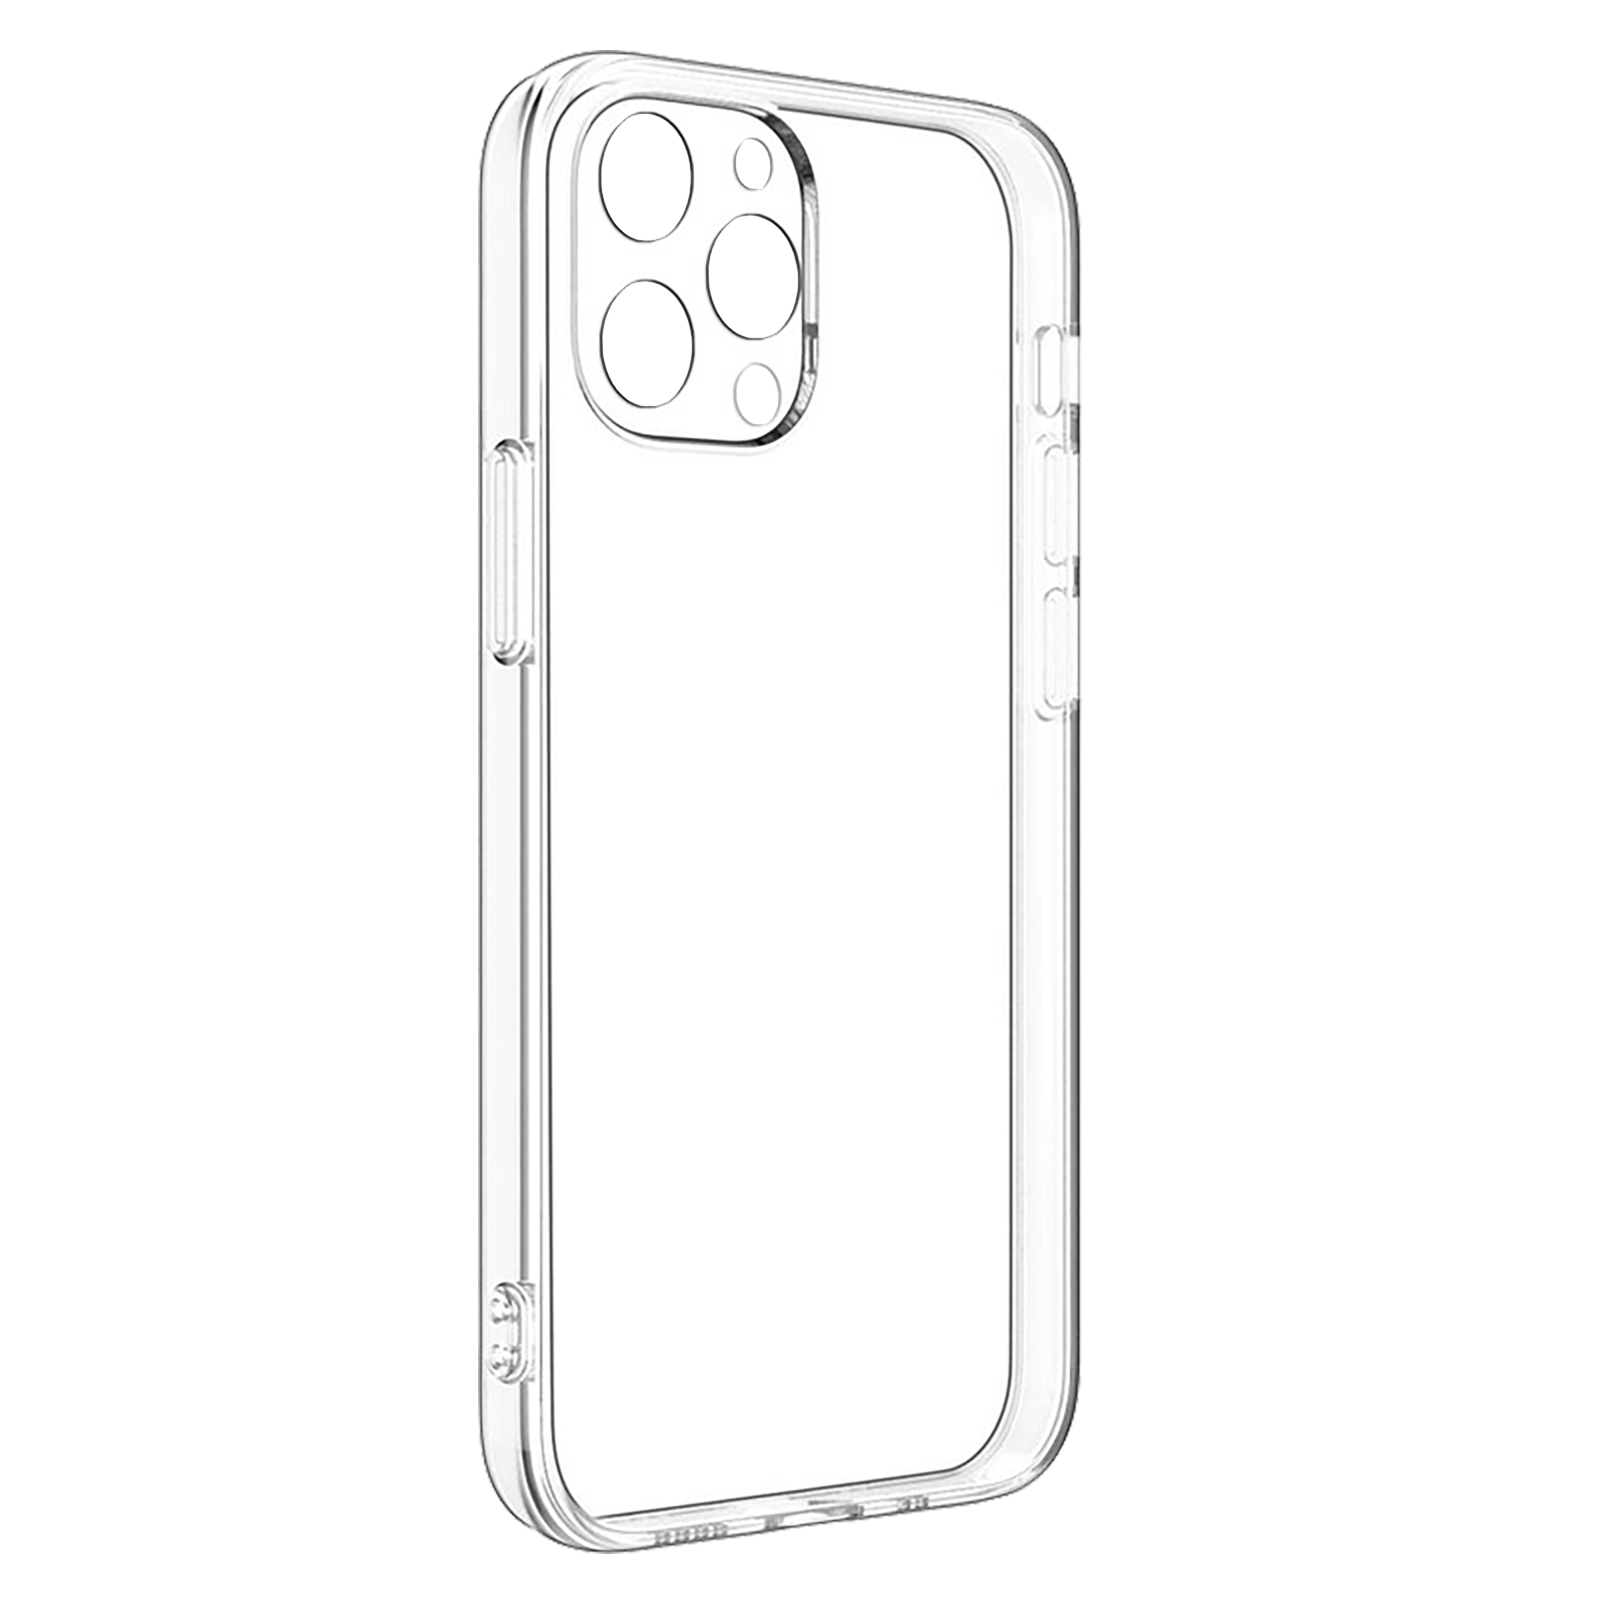 Vaku Luxos Silicon Back Case For iPhone 13 Pro Max (Scratch Resistant, VAKU-IPH13PMX-SLFCLR, Clear)